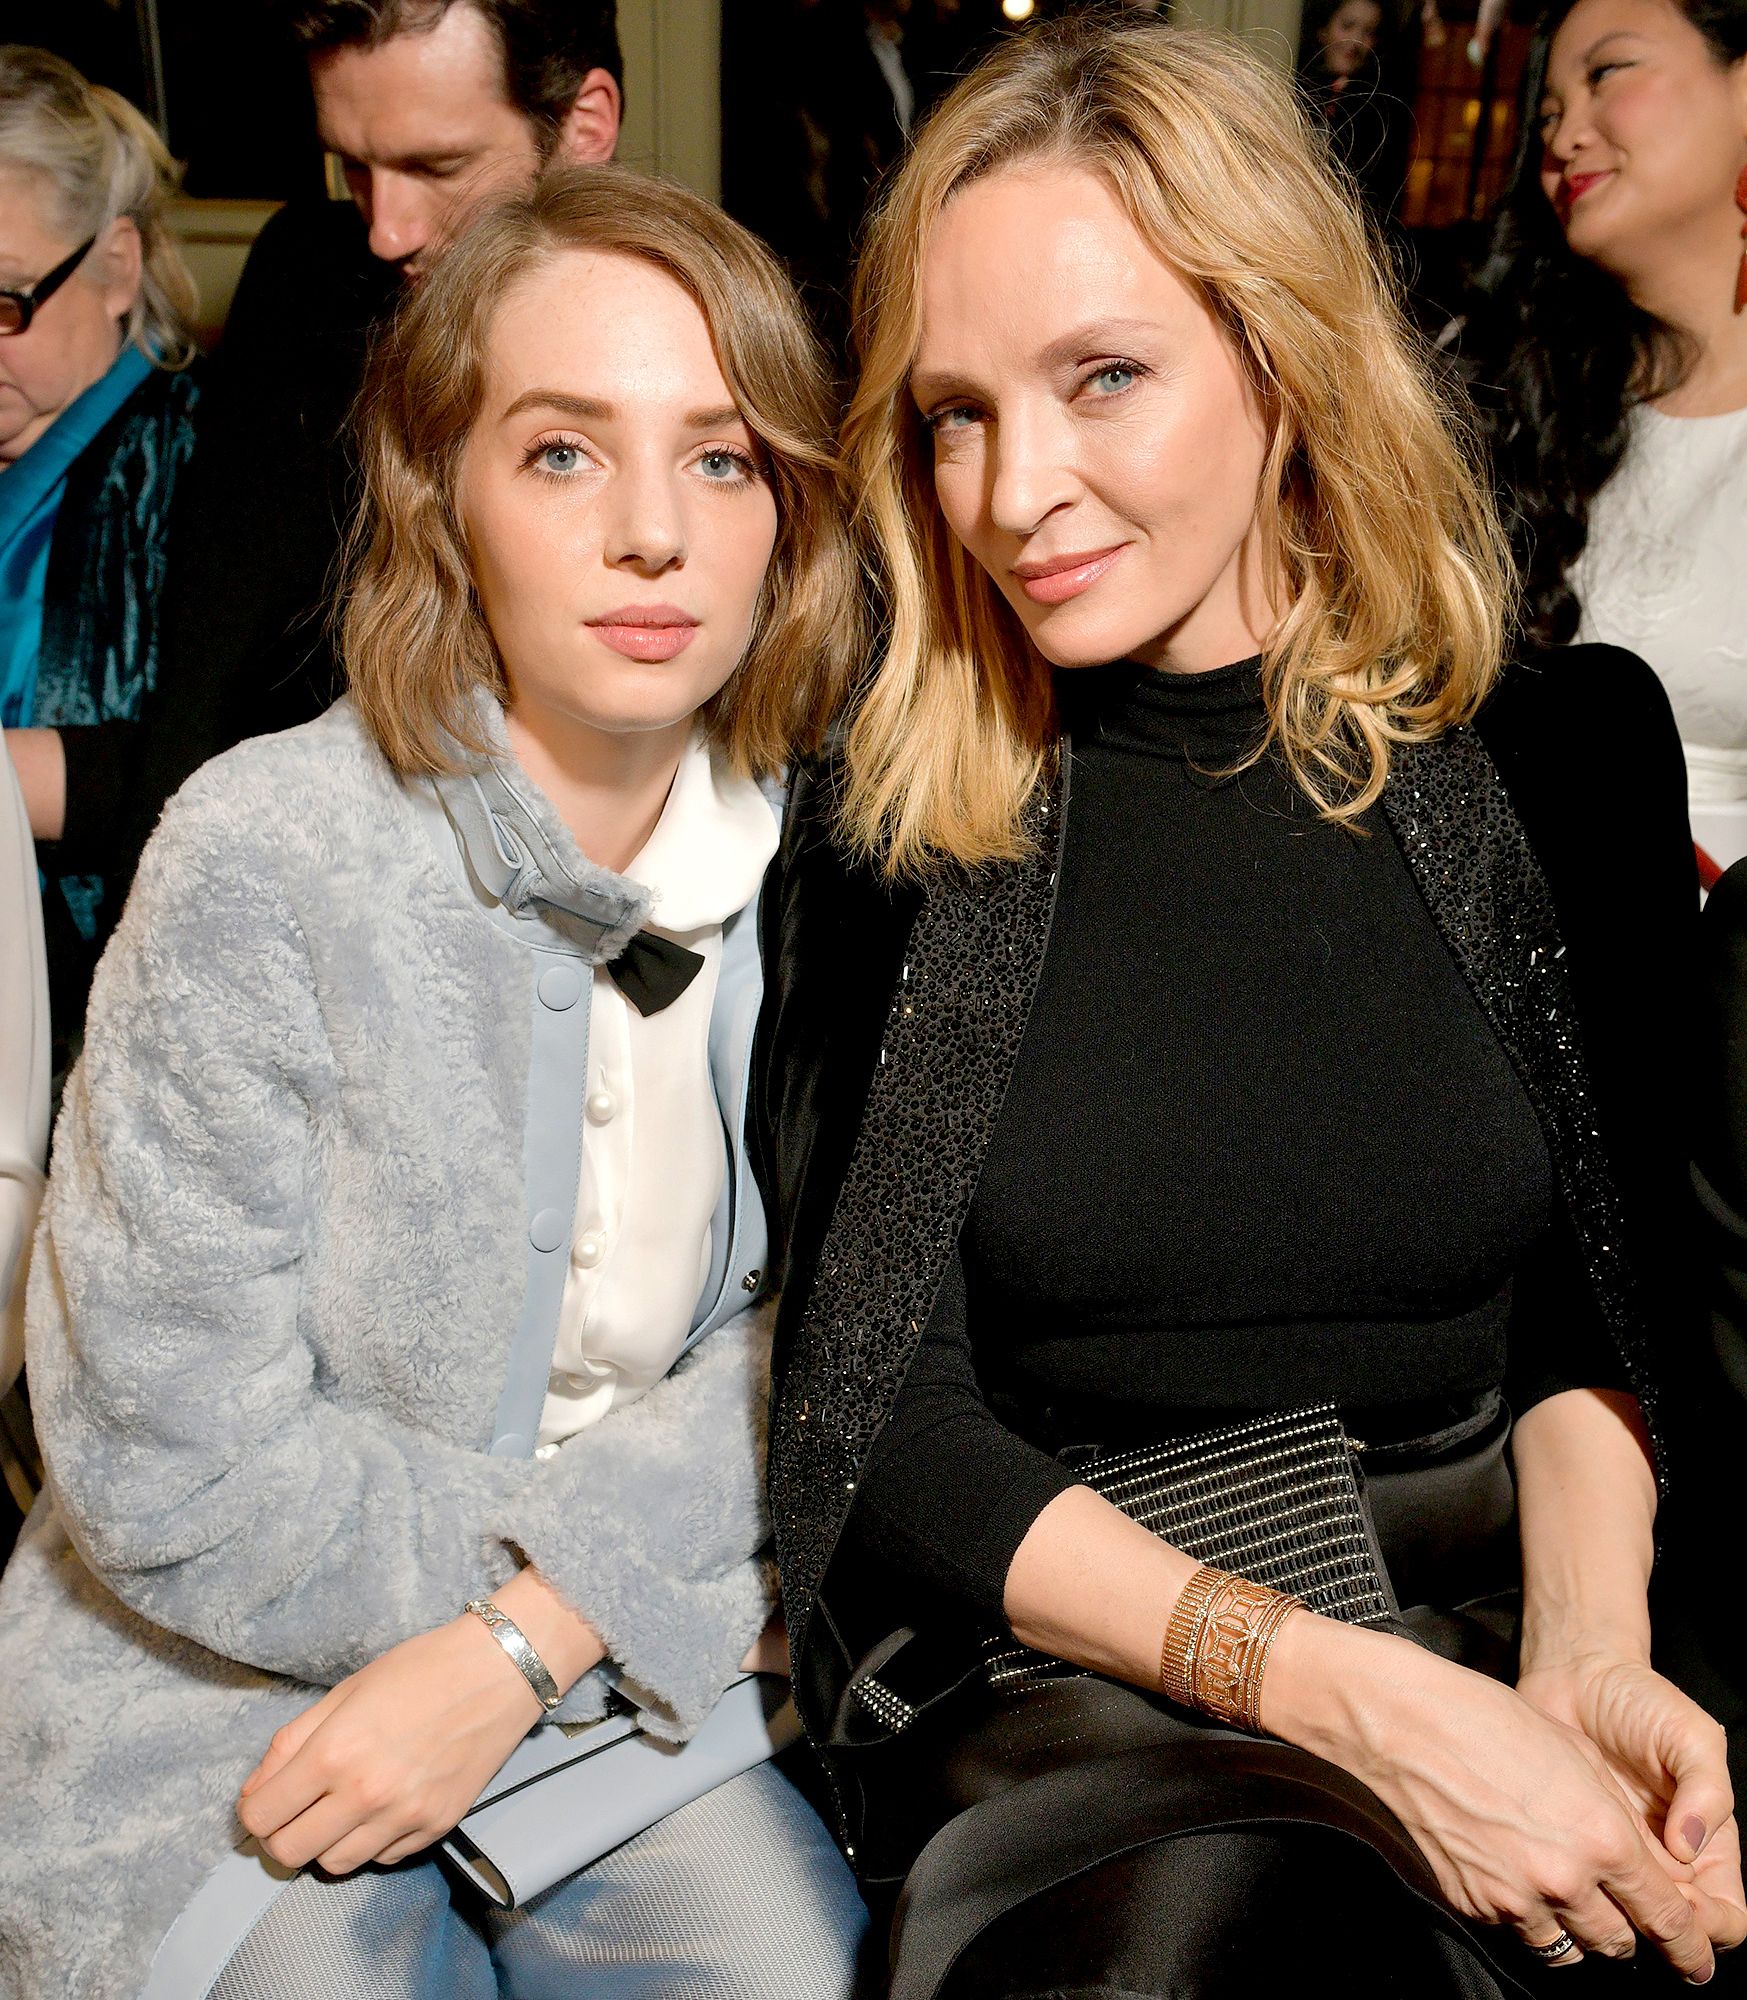 Maya Hawke Says She's 'Annoyed' With Her Parents' Generation